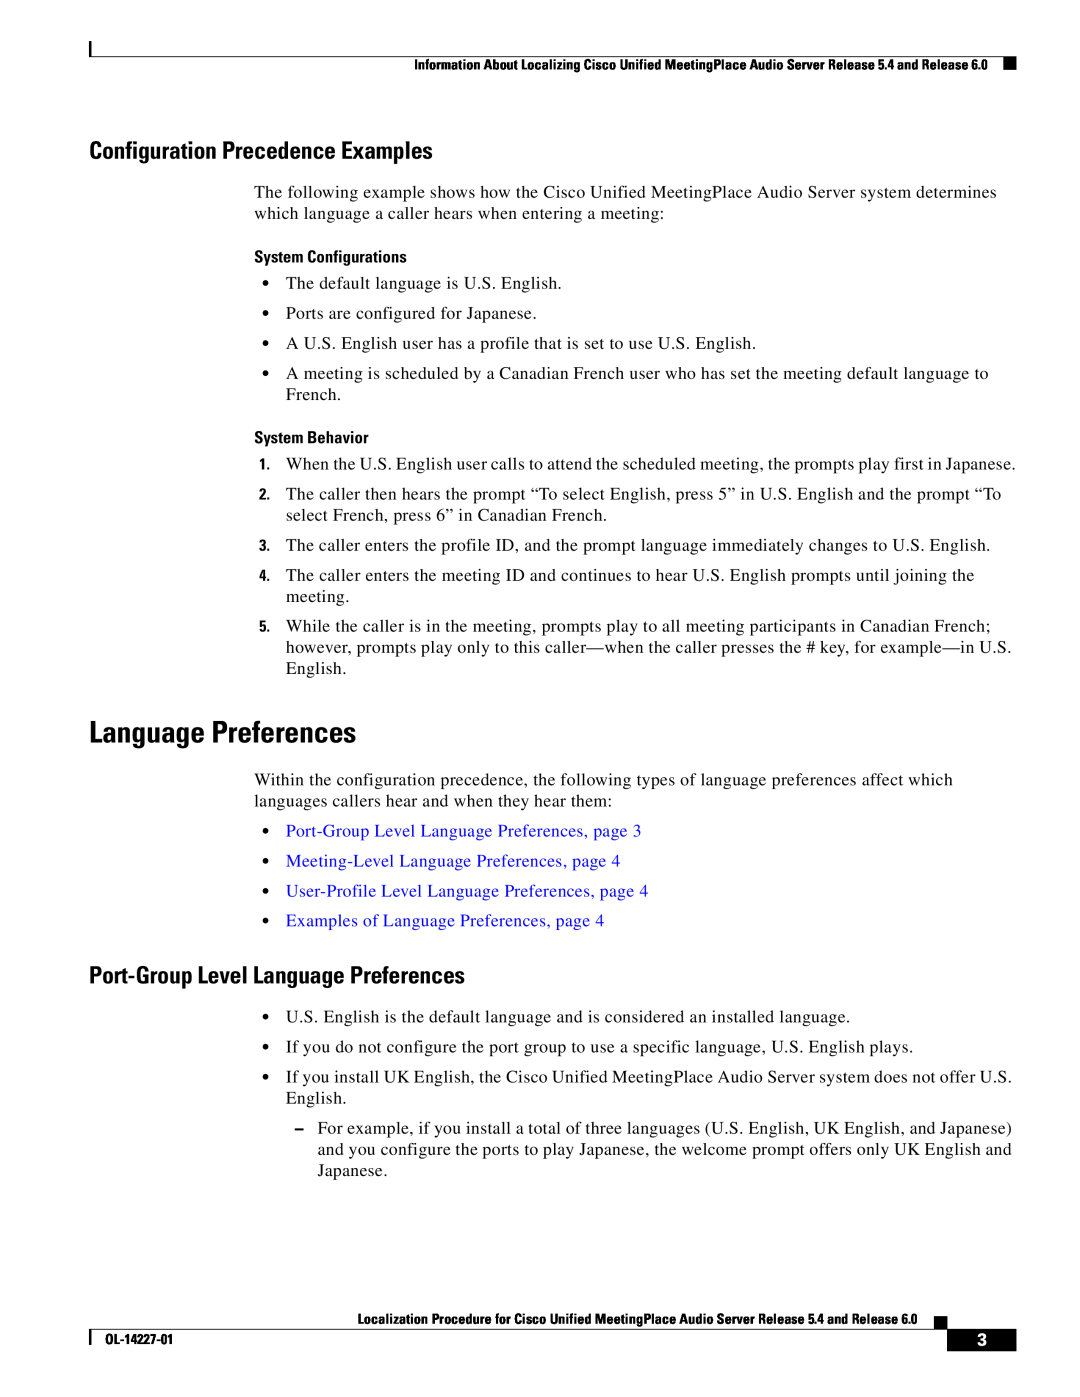 Cisco Systems 6, 5.4 Configuration Precedence Examples, Port-Group Level Language Preferences, System Configurations 